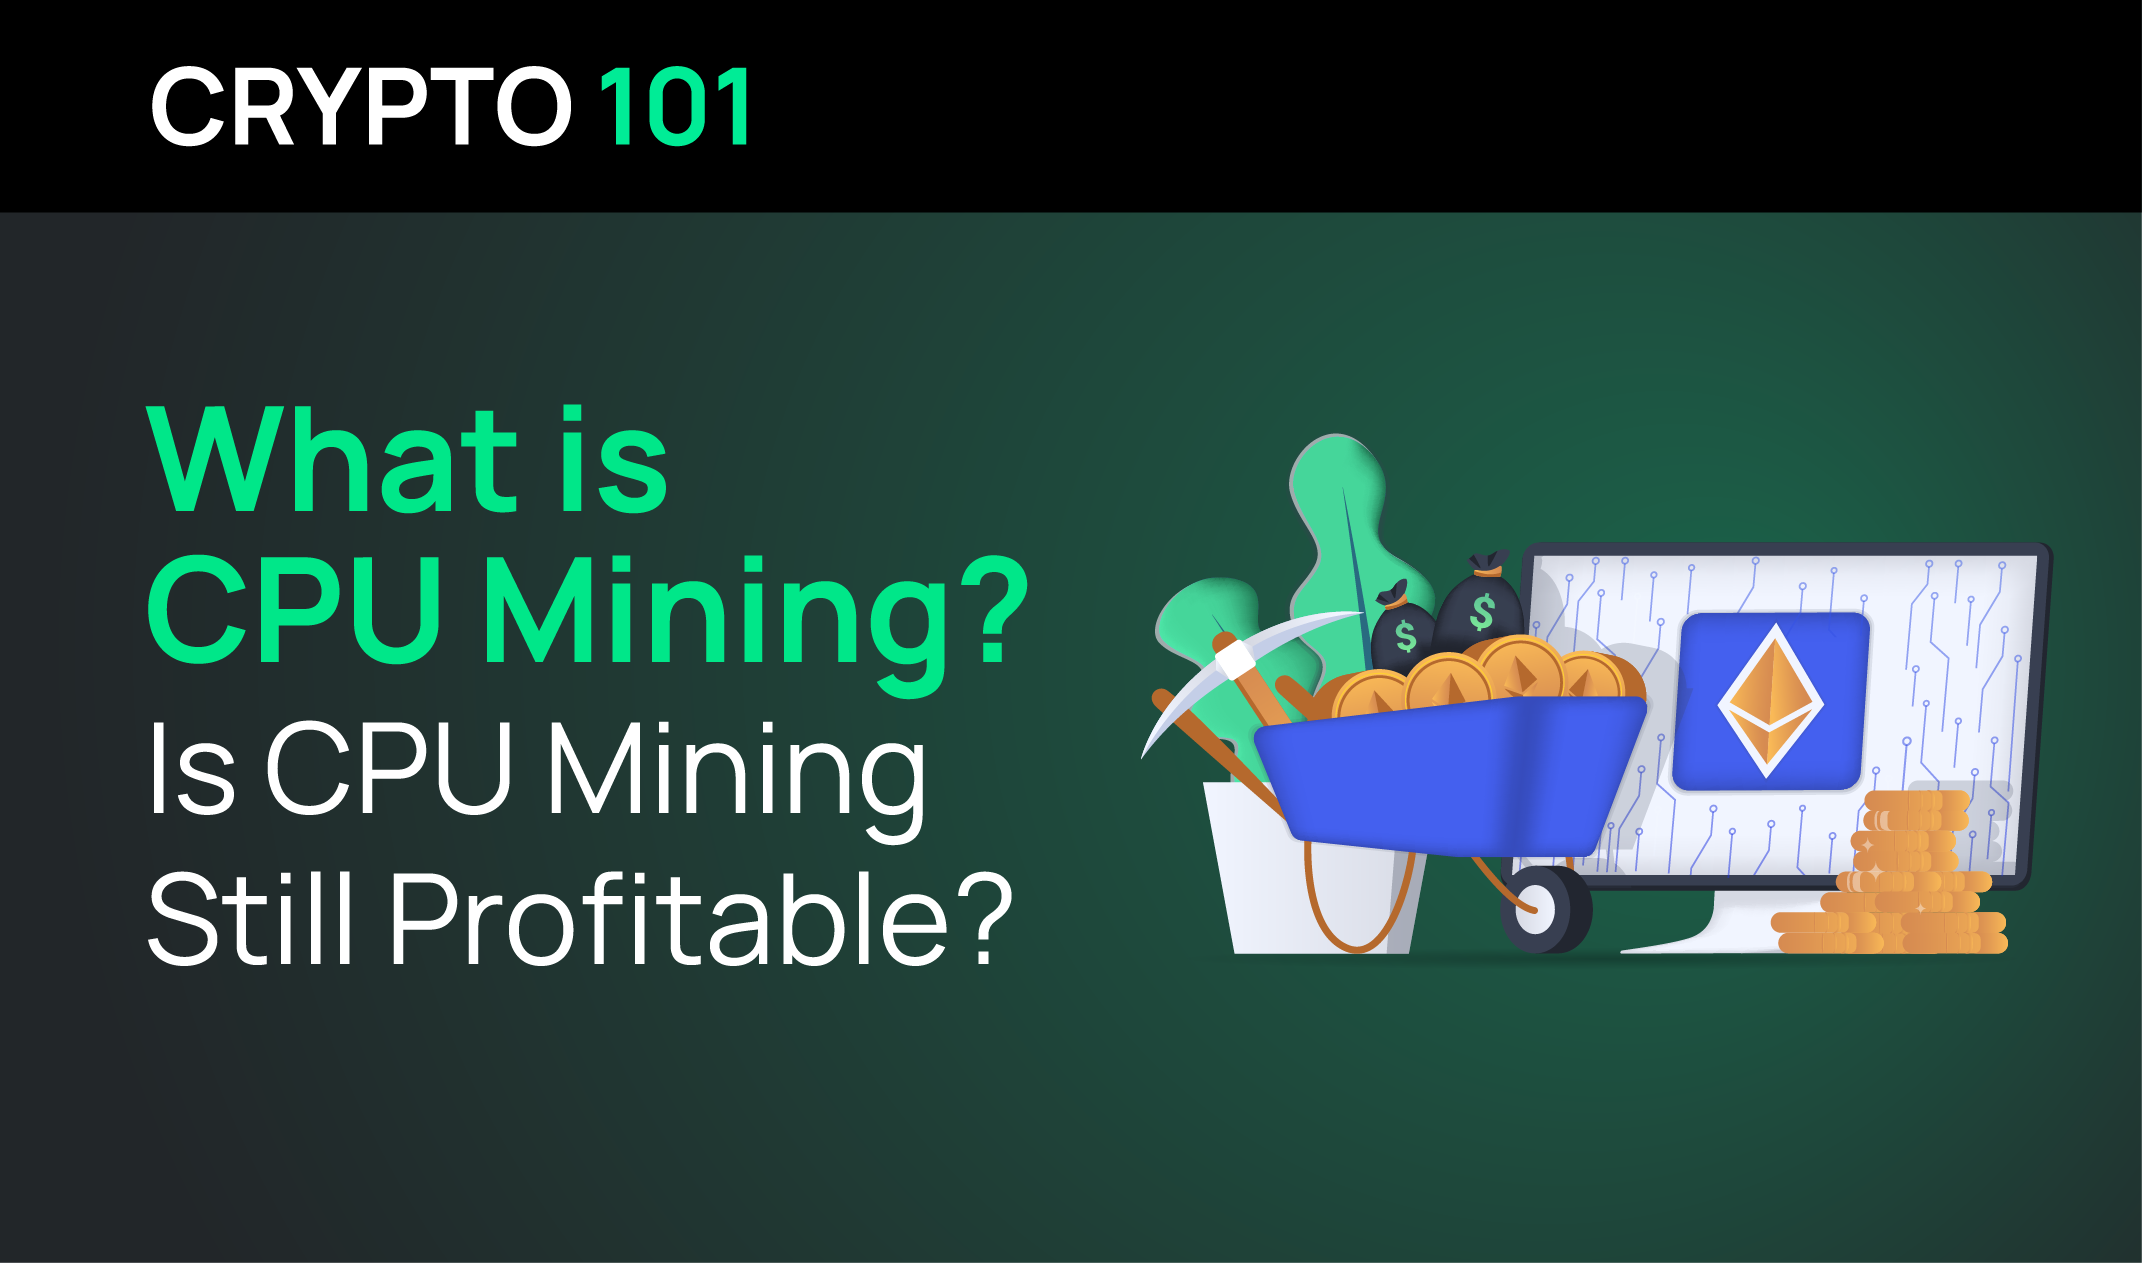 What is CPU Mining? Is CPU Mining Still Profitable?